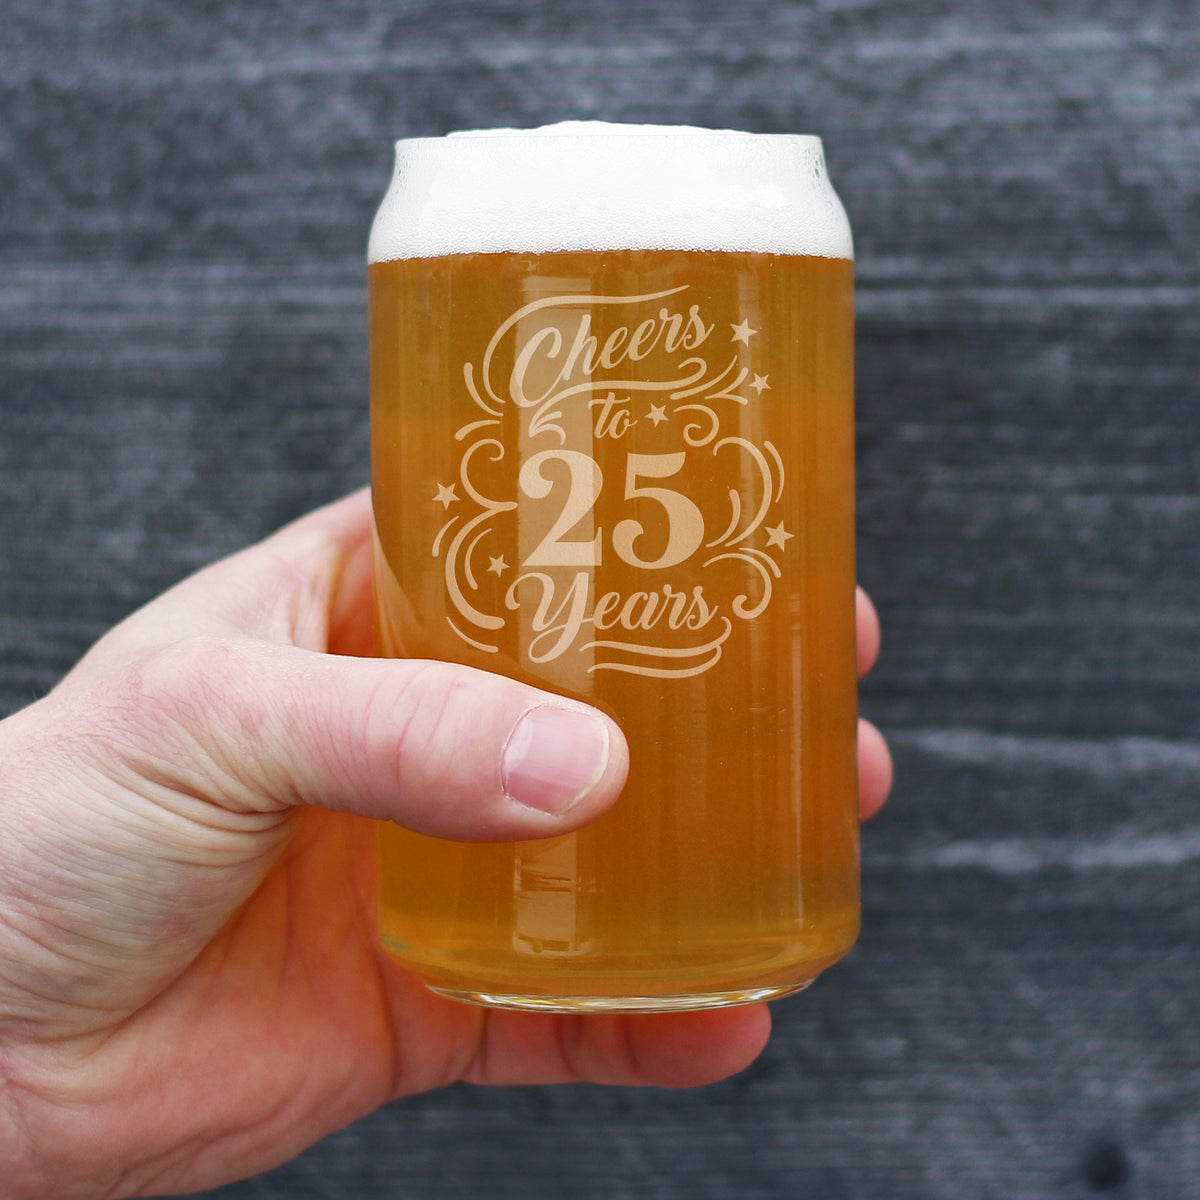 Cheers to 25 Years - Beer Can Pint Glass Gifts for Women &amp; Men - 25th Anniversary Party Decor - 16 Oz Glasses